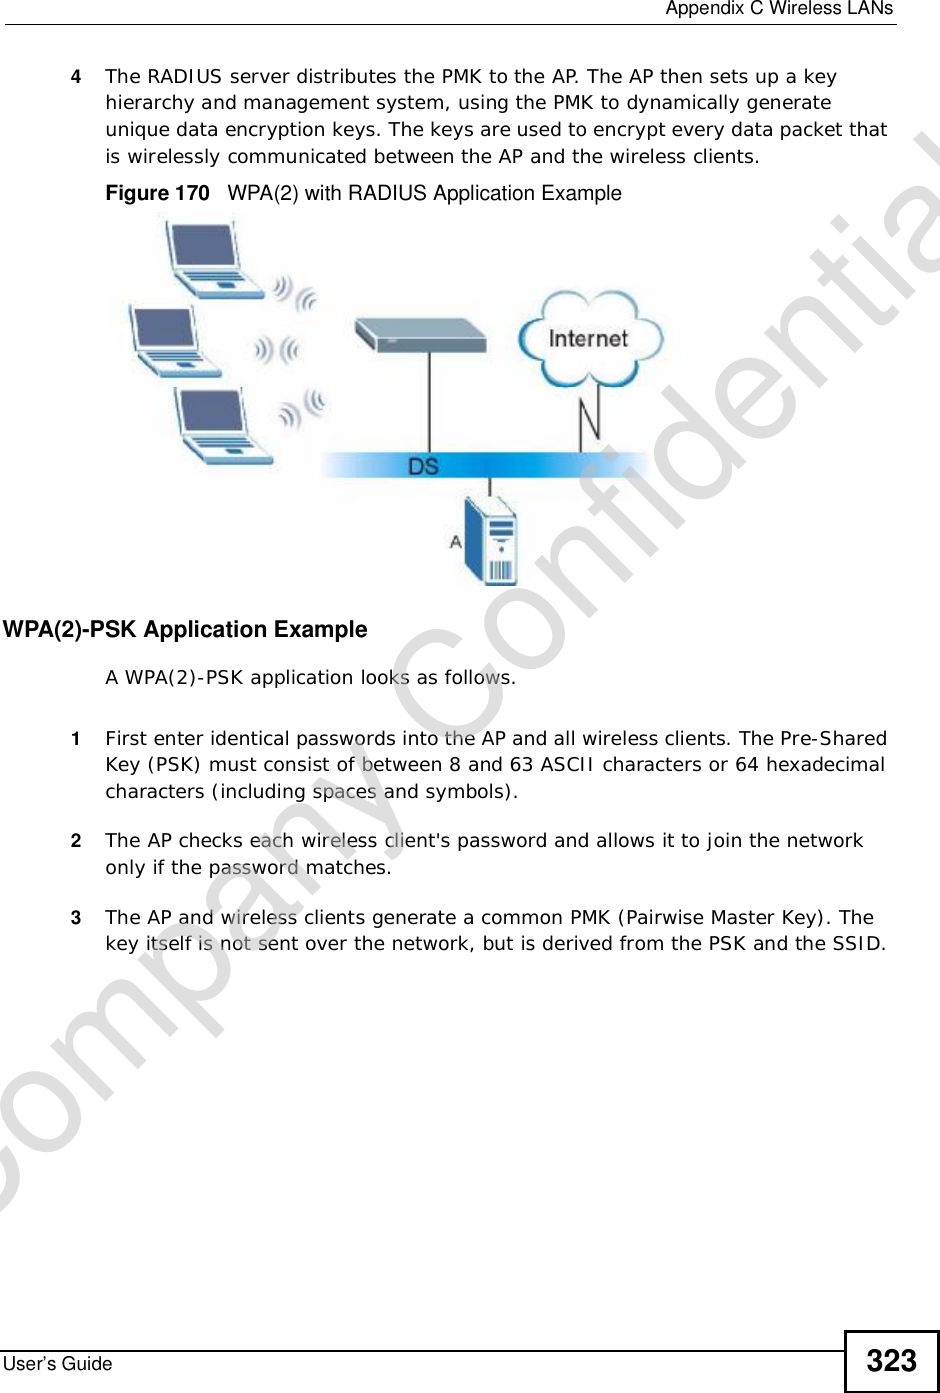  Appendix CWireless LANsUser’s Guide 3234The RADIUS server distributes the PMK to the AP. The AP then sets up a key hierarchy and management system, using the PMK to dynamically generate unique data encryption keys. The keys are used to encrypt every data packet that is wirelessly communicated between the AP and the wireless clients.Figure 170   WPA(2) with RADIUS Application ExampleWPA(2)-PSK Application ExampleA WPA(2)-PSK application looks as follows.1First enter identical passwords into the AP and all wireless clients. The Pre-Shared Key (PSK) must consist of between 8 and 63 ASCII characters or 64 hexadecimal characters (including spaces and symbols).2The AP checks each wireless client&apos;s password and allows it to join the network only if the password matches.3The AP and wireless clients generate a common PMK (Pairwise Master Key). The key itself is not sent over the network, but is derived from the PSK and the SSID. Company Confidential